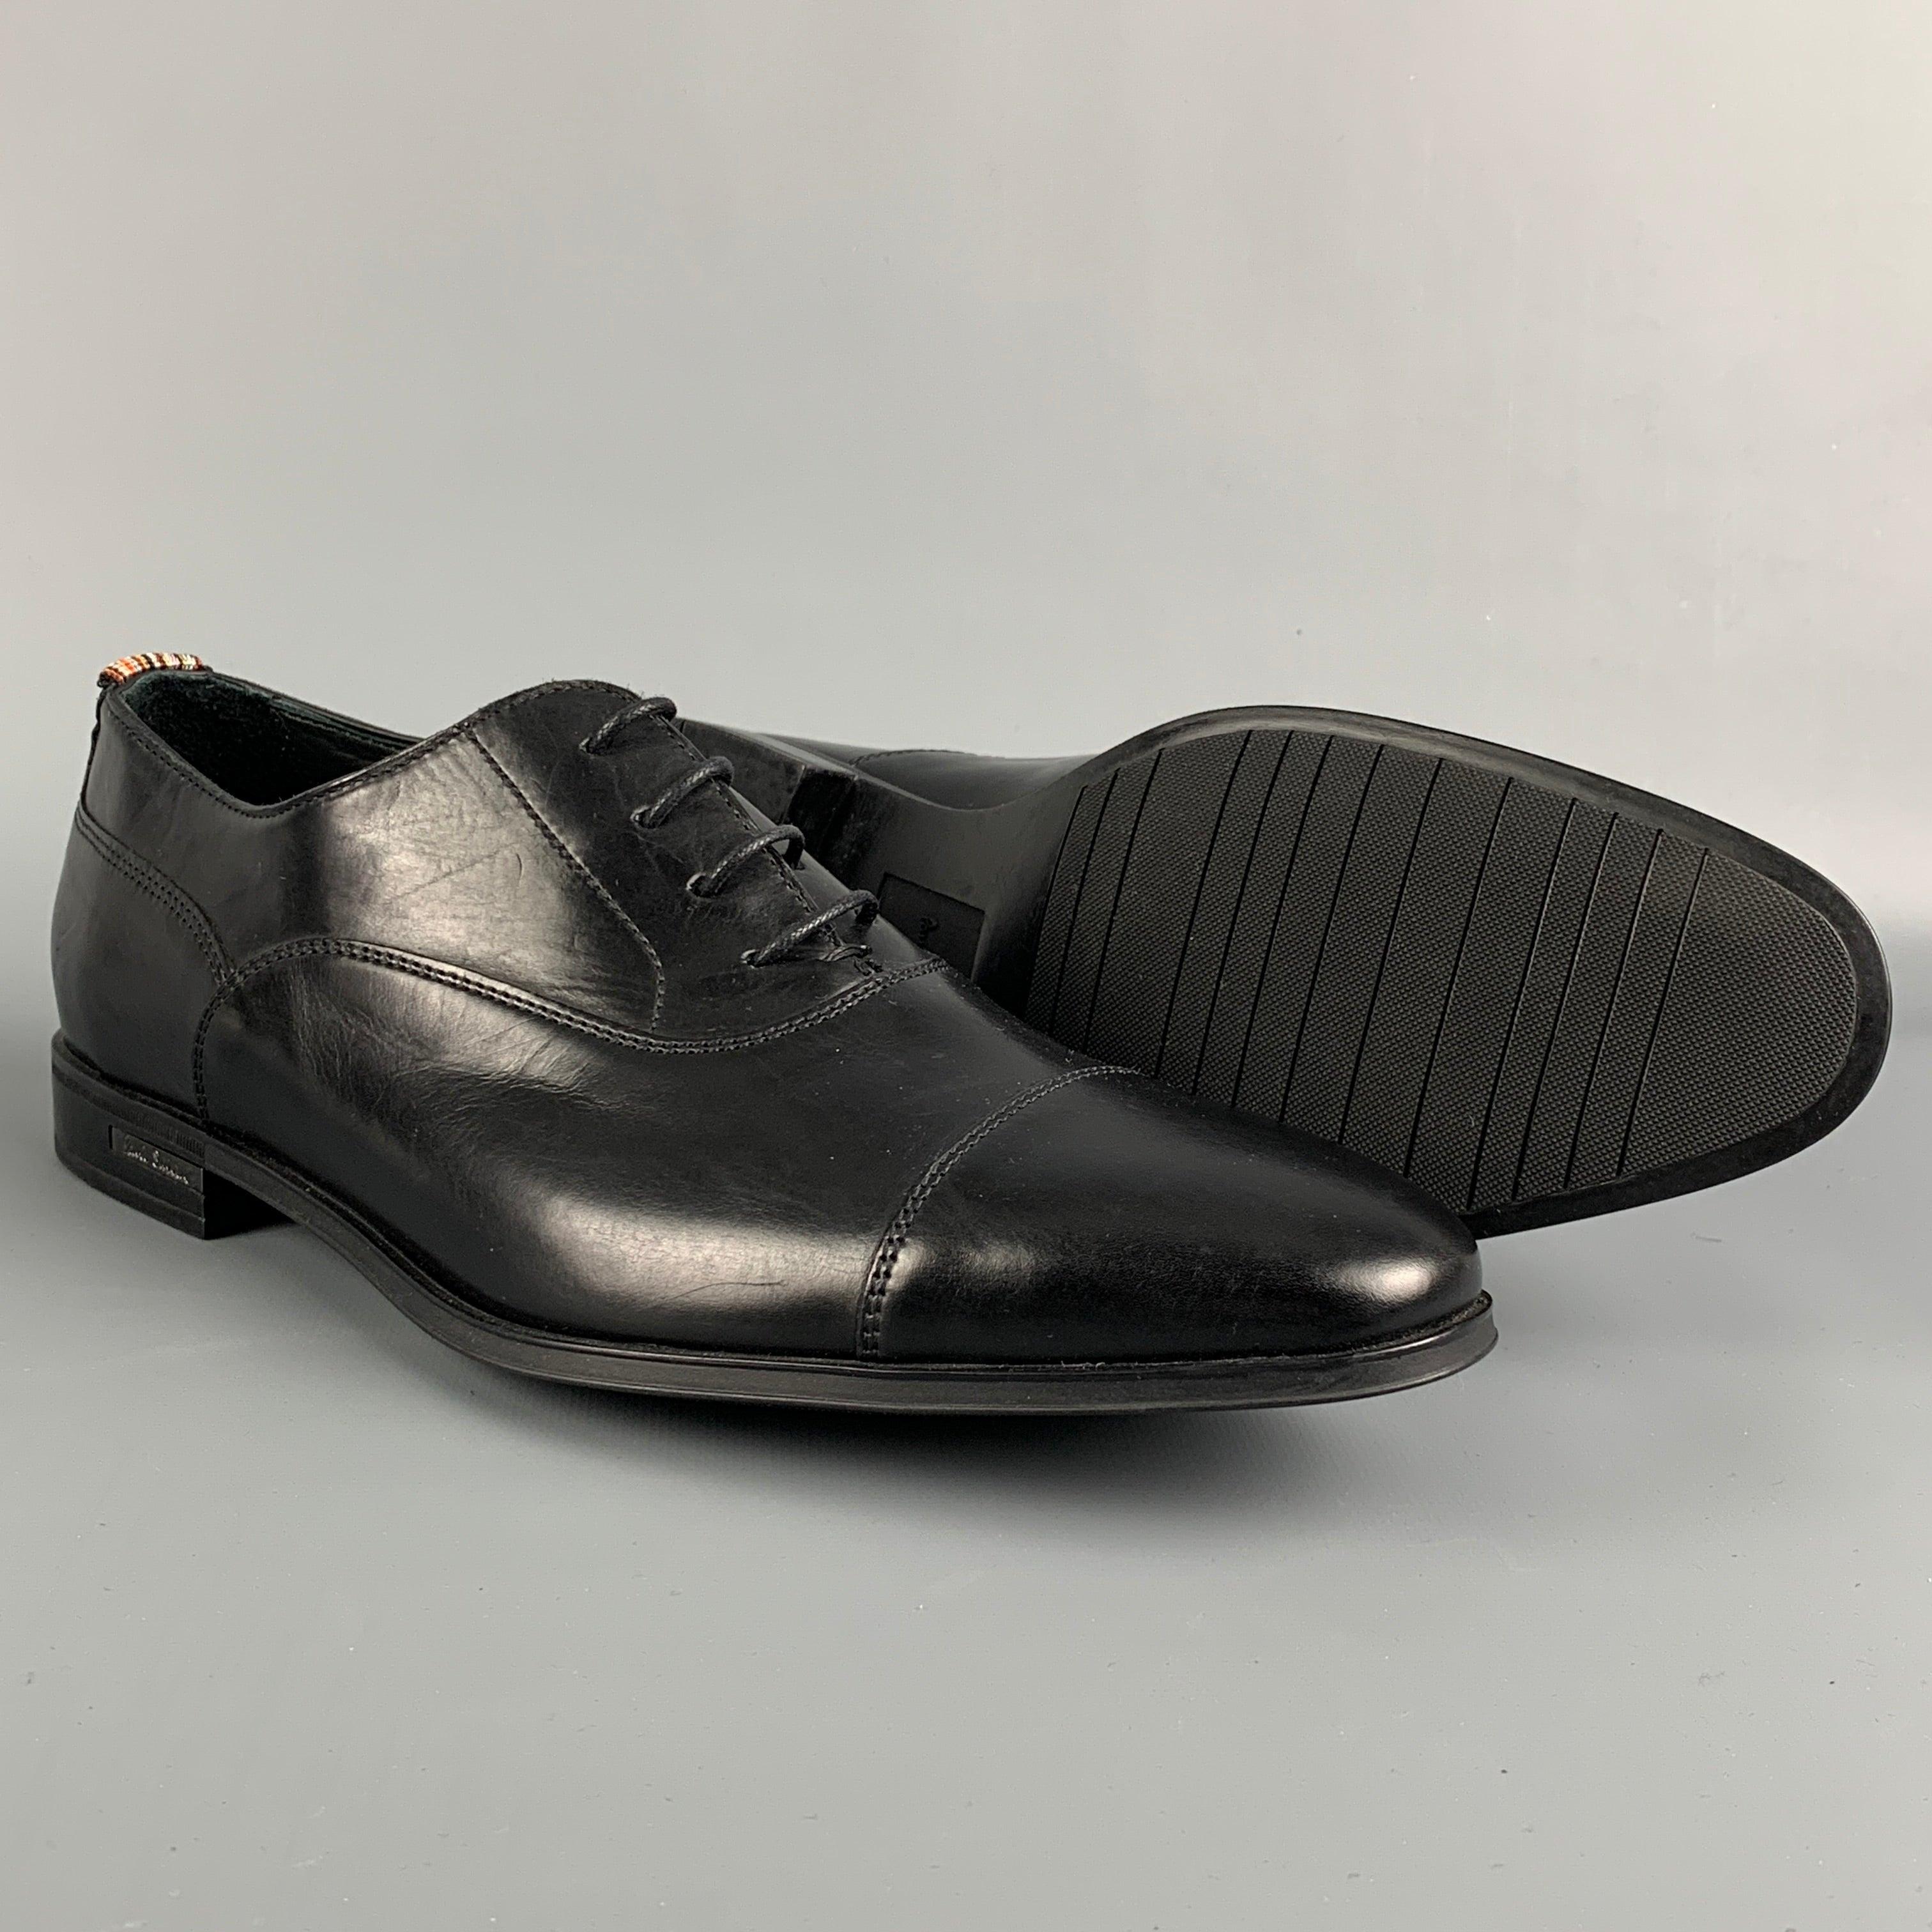 PAUL SMITH Size 8 Black Leather Lace Up Dress Shoes In Good Condition For Sale In San Francisco, CA